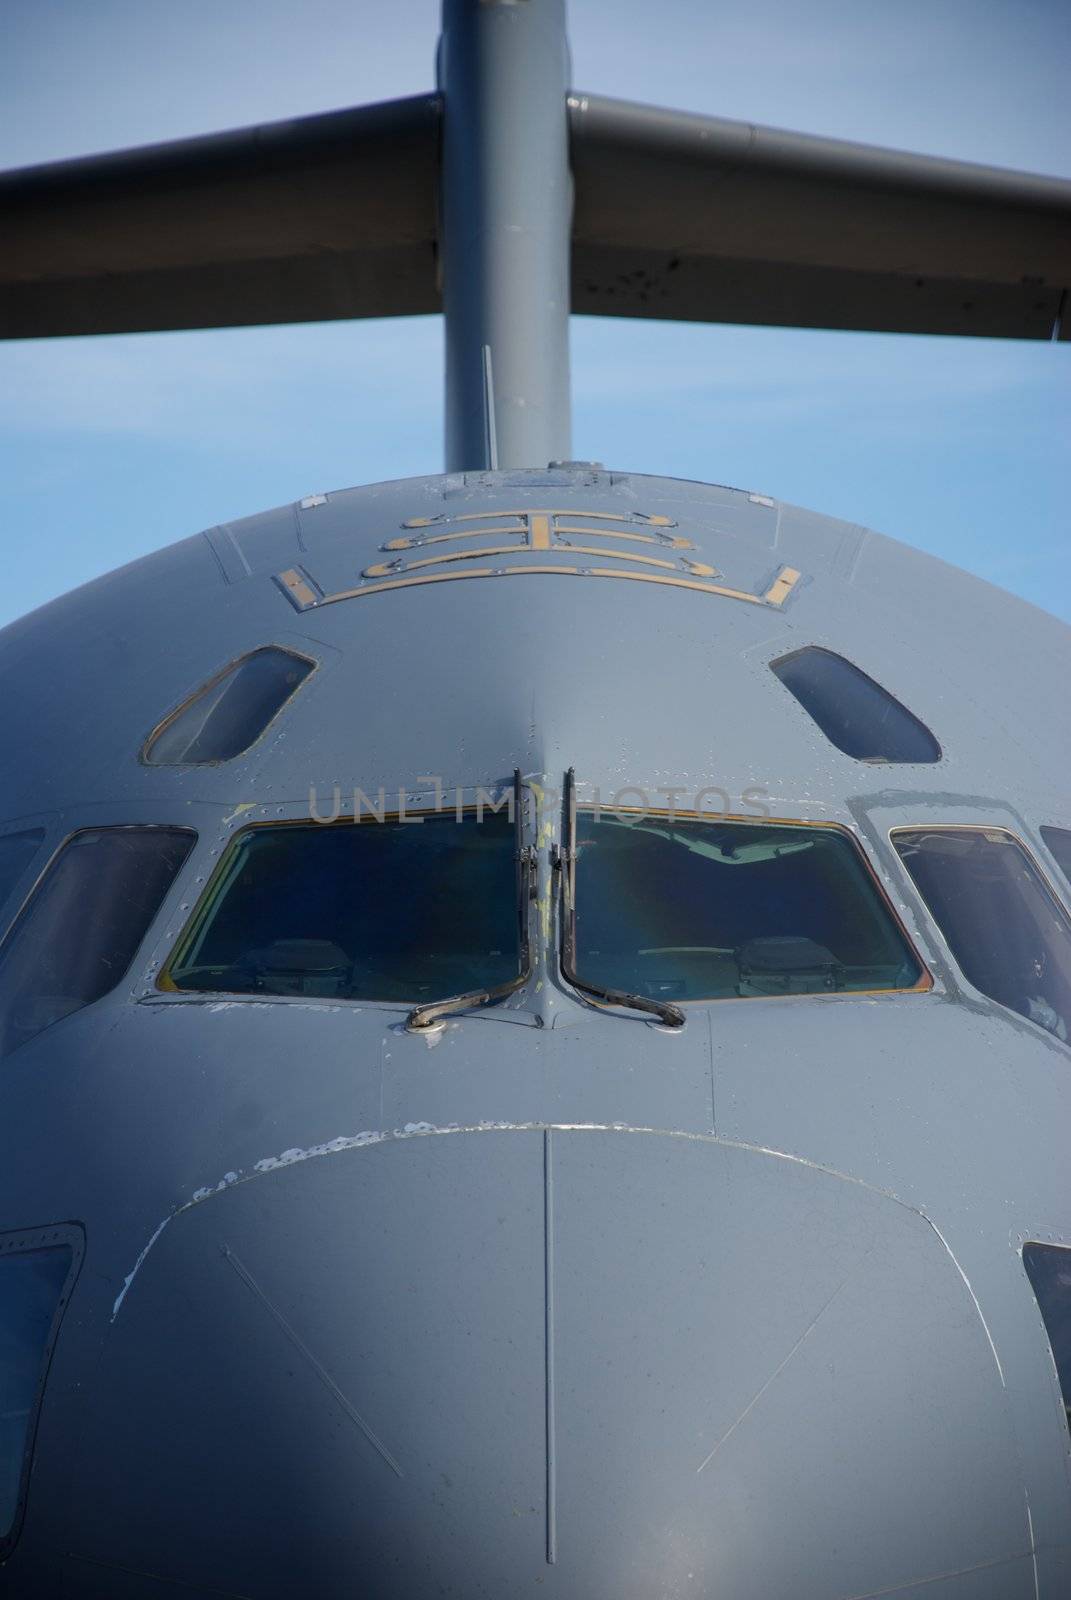 A close-up showing the nose and tail of an Air Force cargo jet